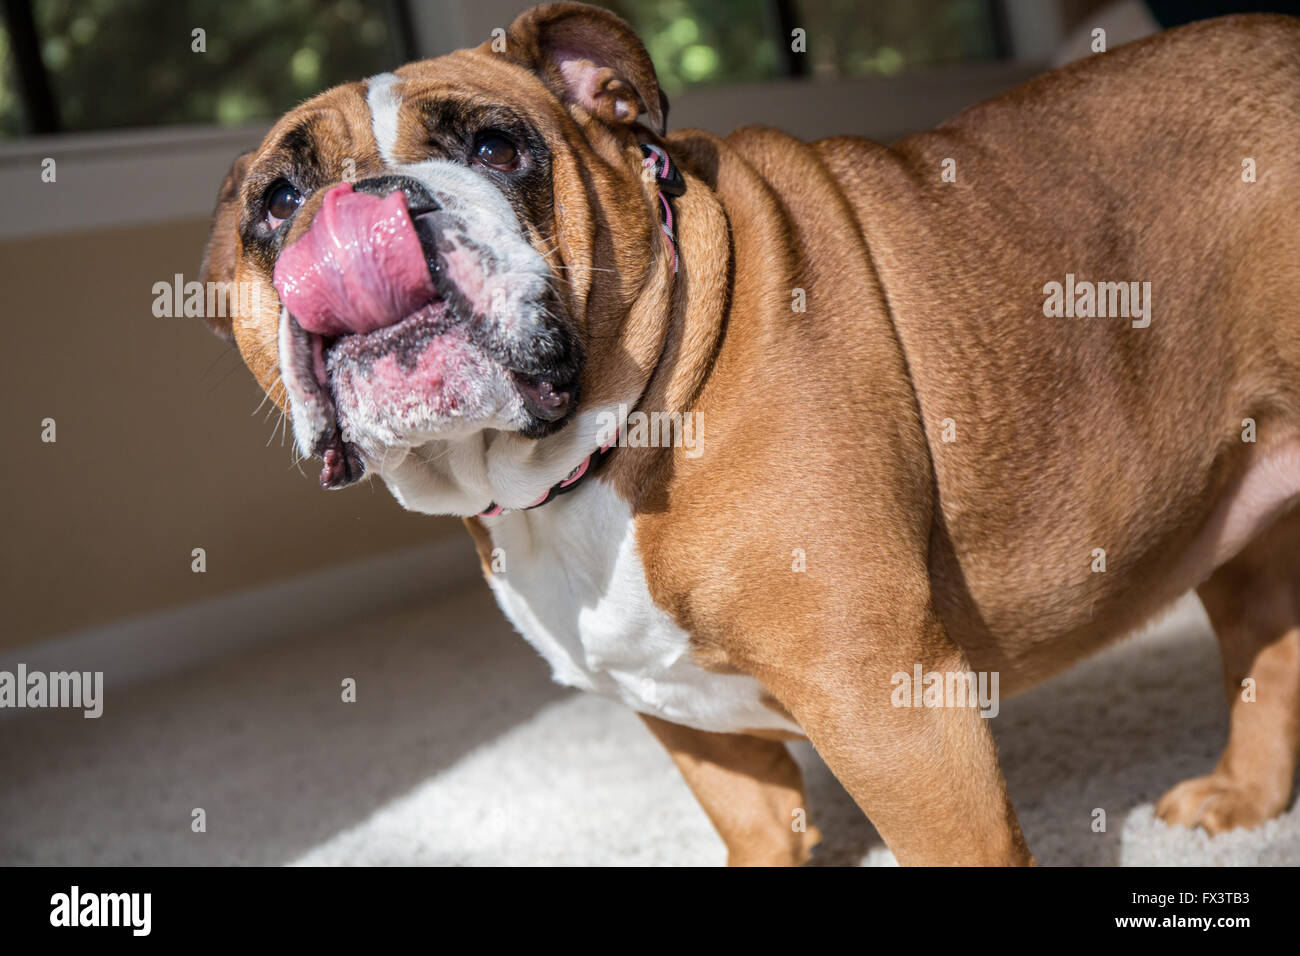 Tessa, the English Bulldog, hungrily awaiting another treat for doing a trick, in Issaquah, Washington, USA Stock Photo